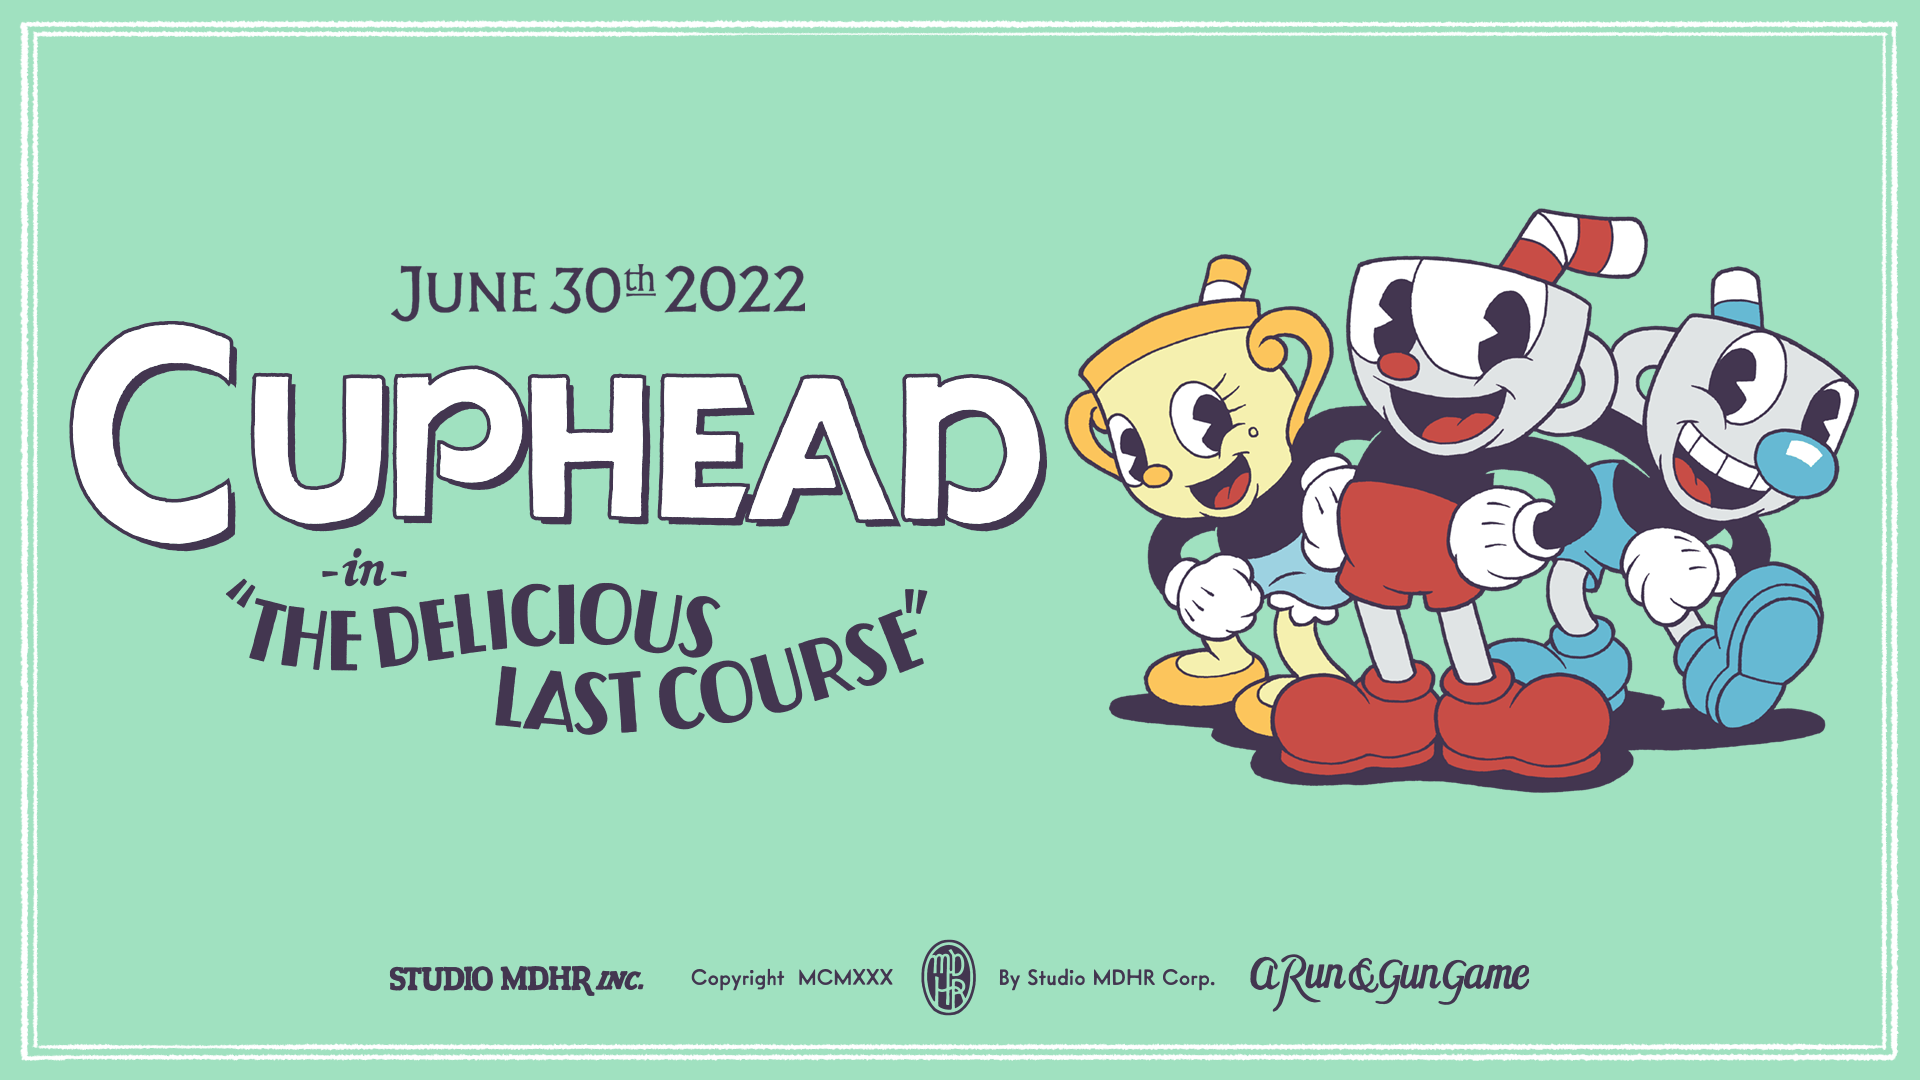 Studio MDHR Introduces Cuphead's "Delicious Last Course" DLC at the Game Awards